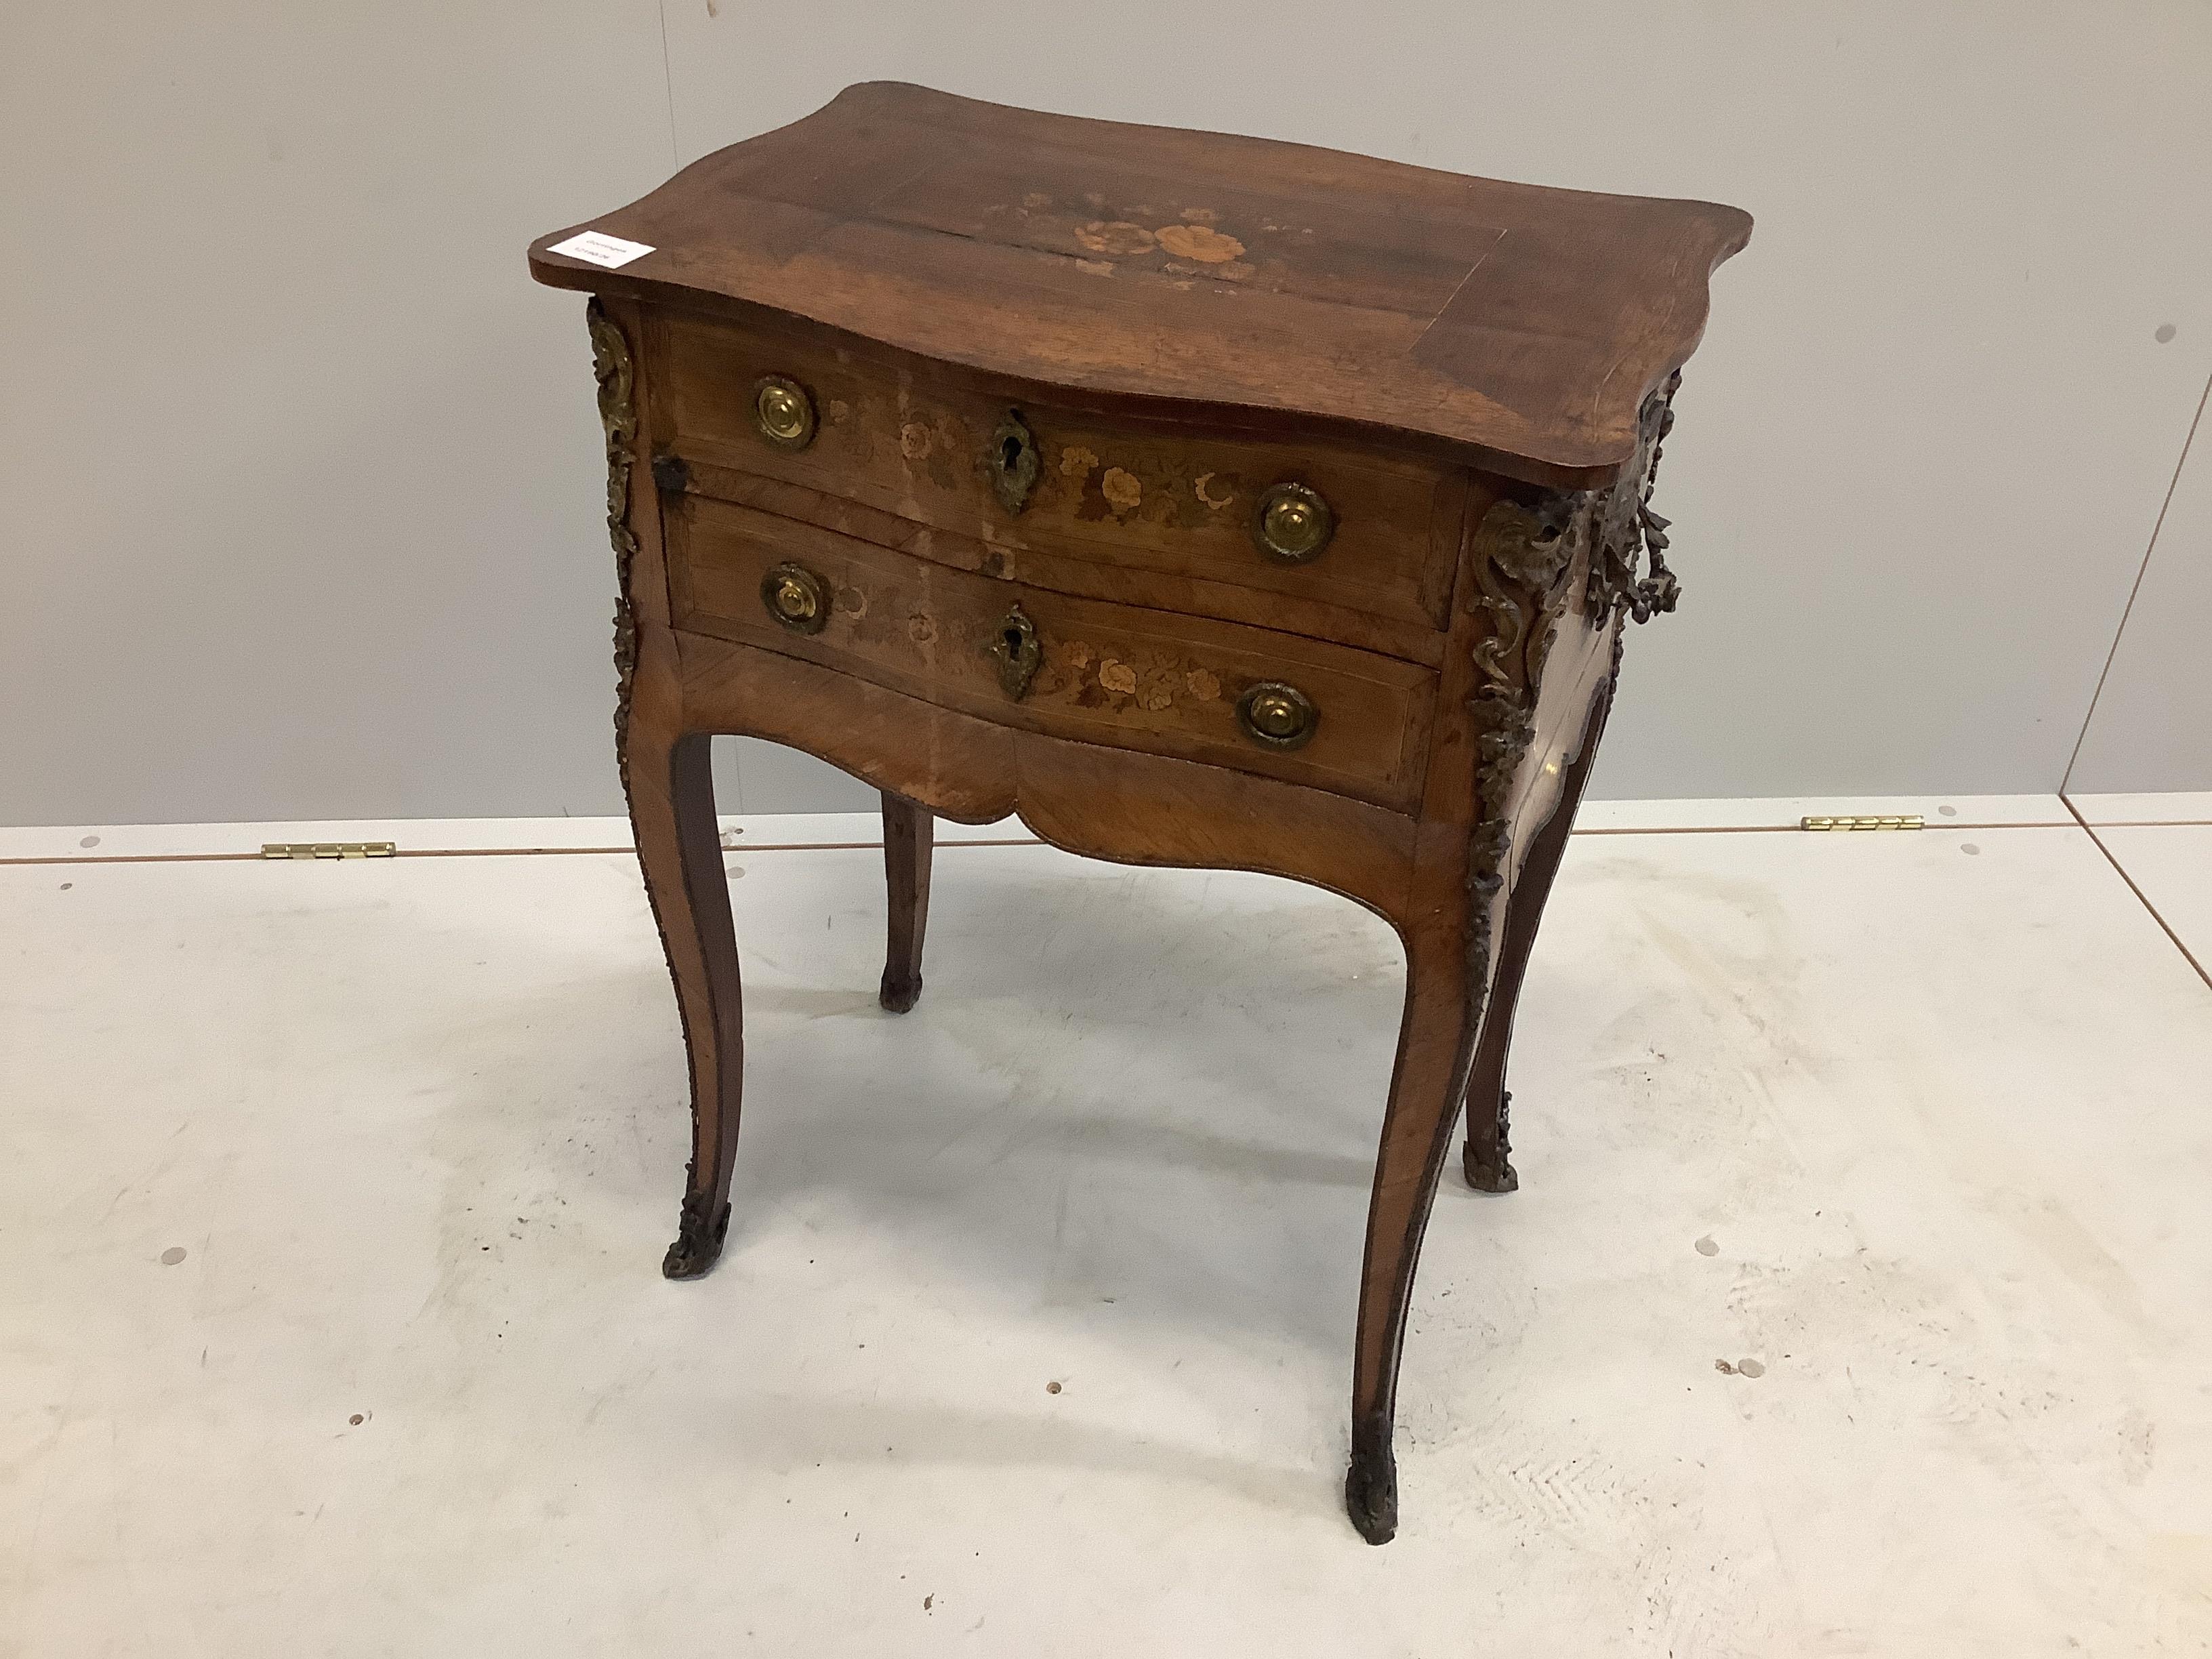 A French marquetry inlaid serpentine side table fitted with two drawers, width 53cm, depth 35cm, height 70cm